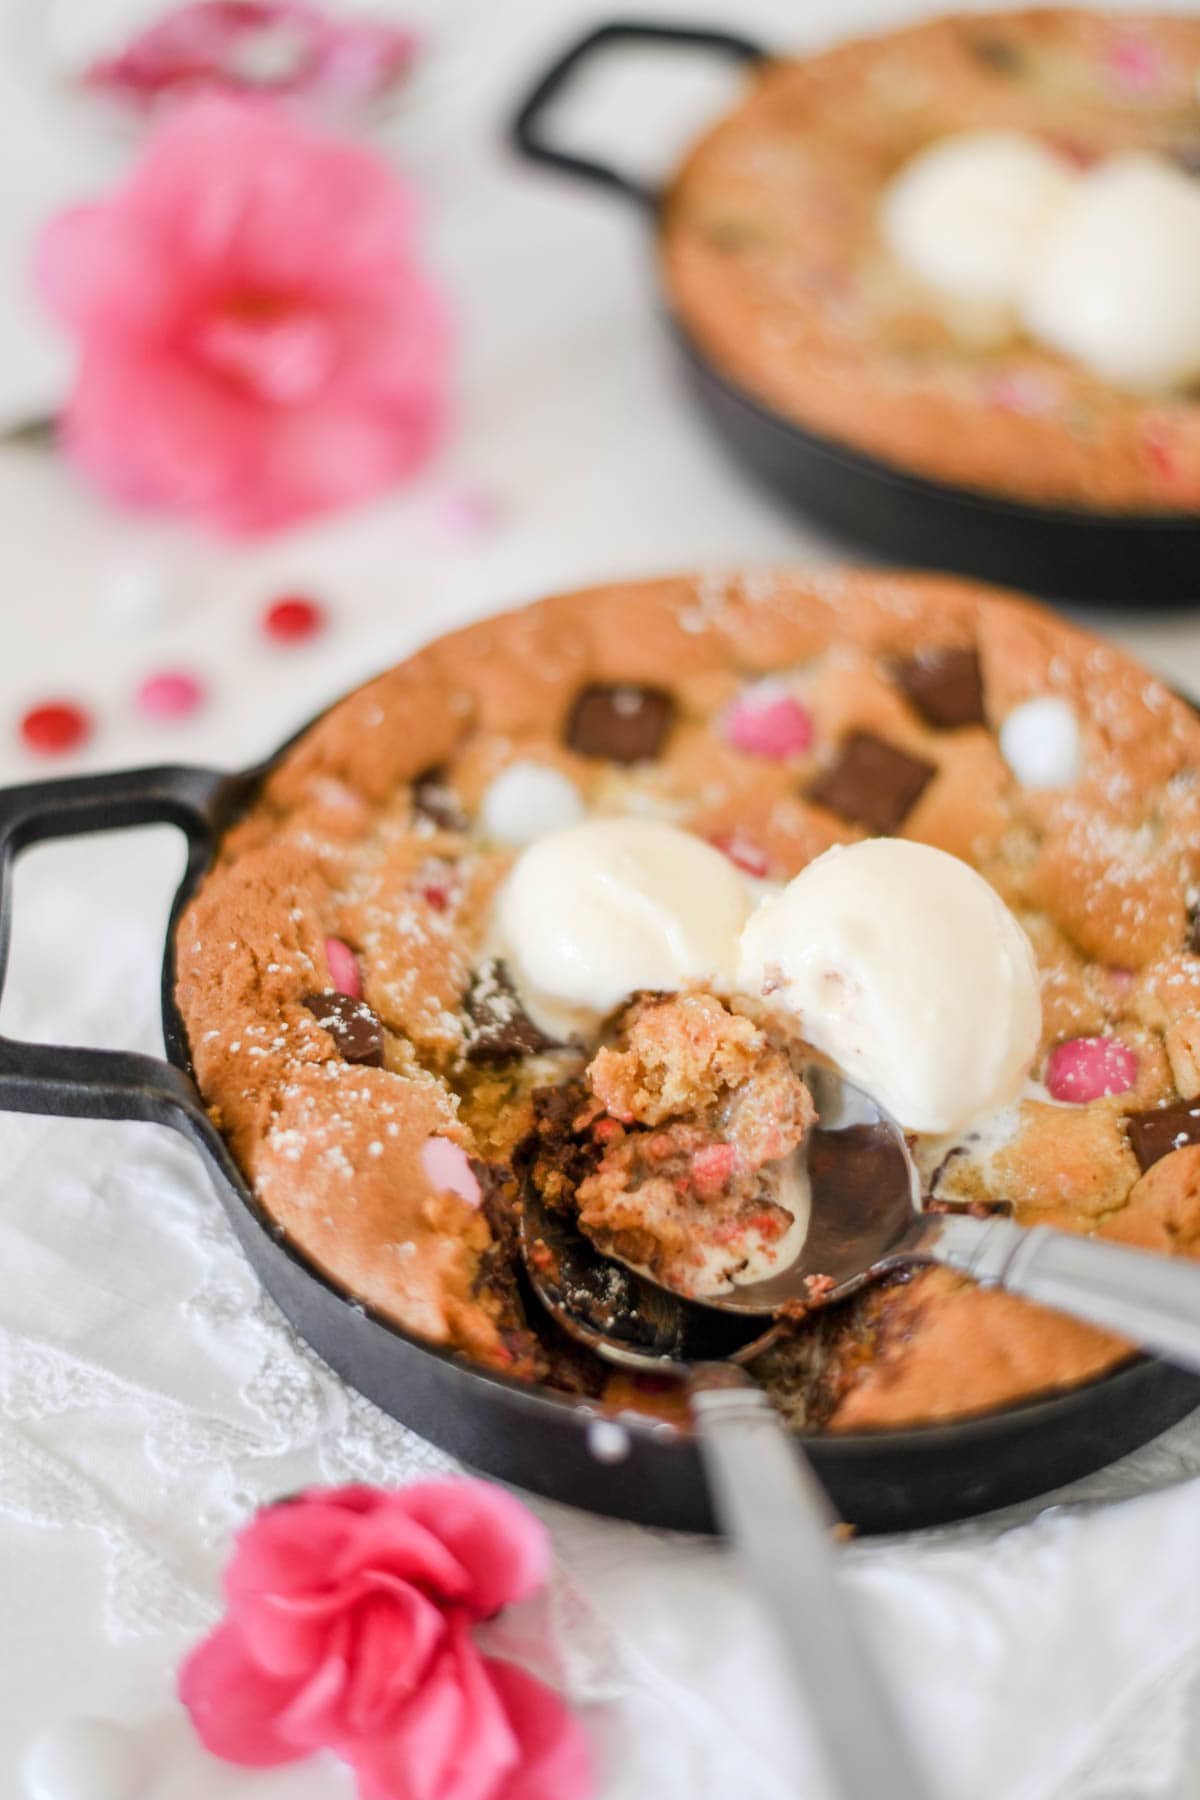 https://aimeebroussard.com/wp-content/uploads/2021/01/Skillet-Cookie-Cake-for-Two_-4.jpg